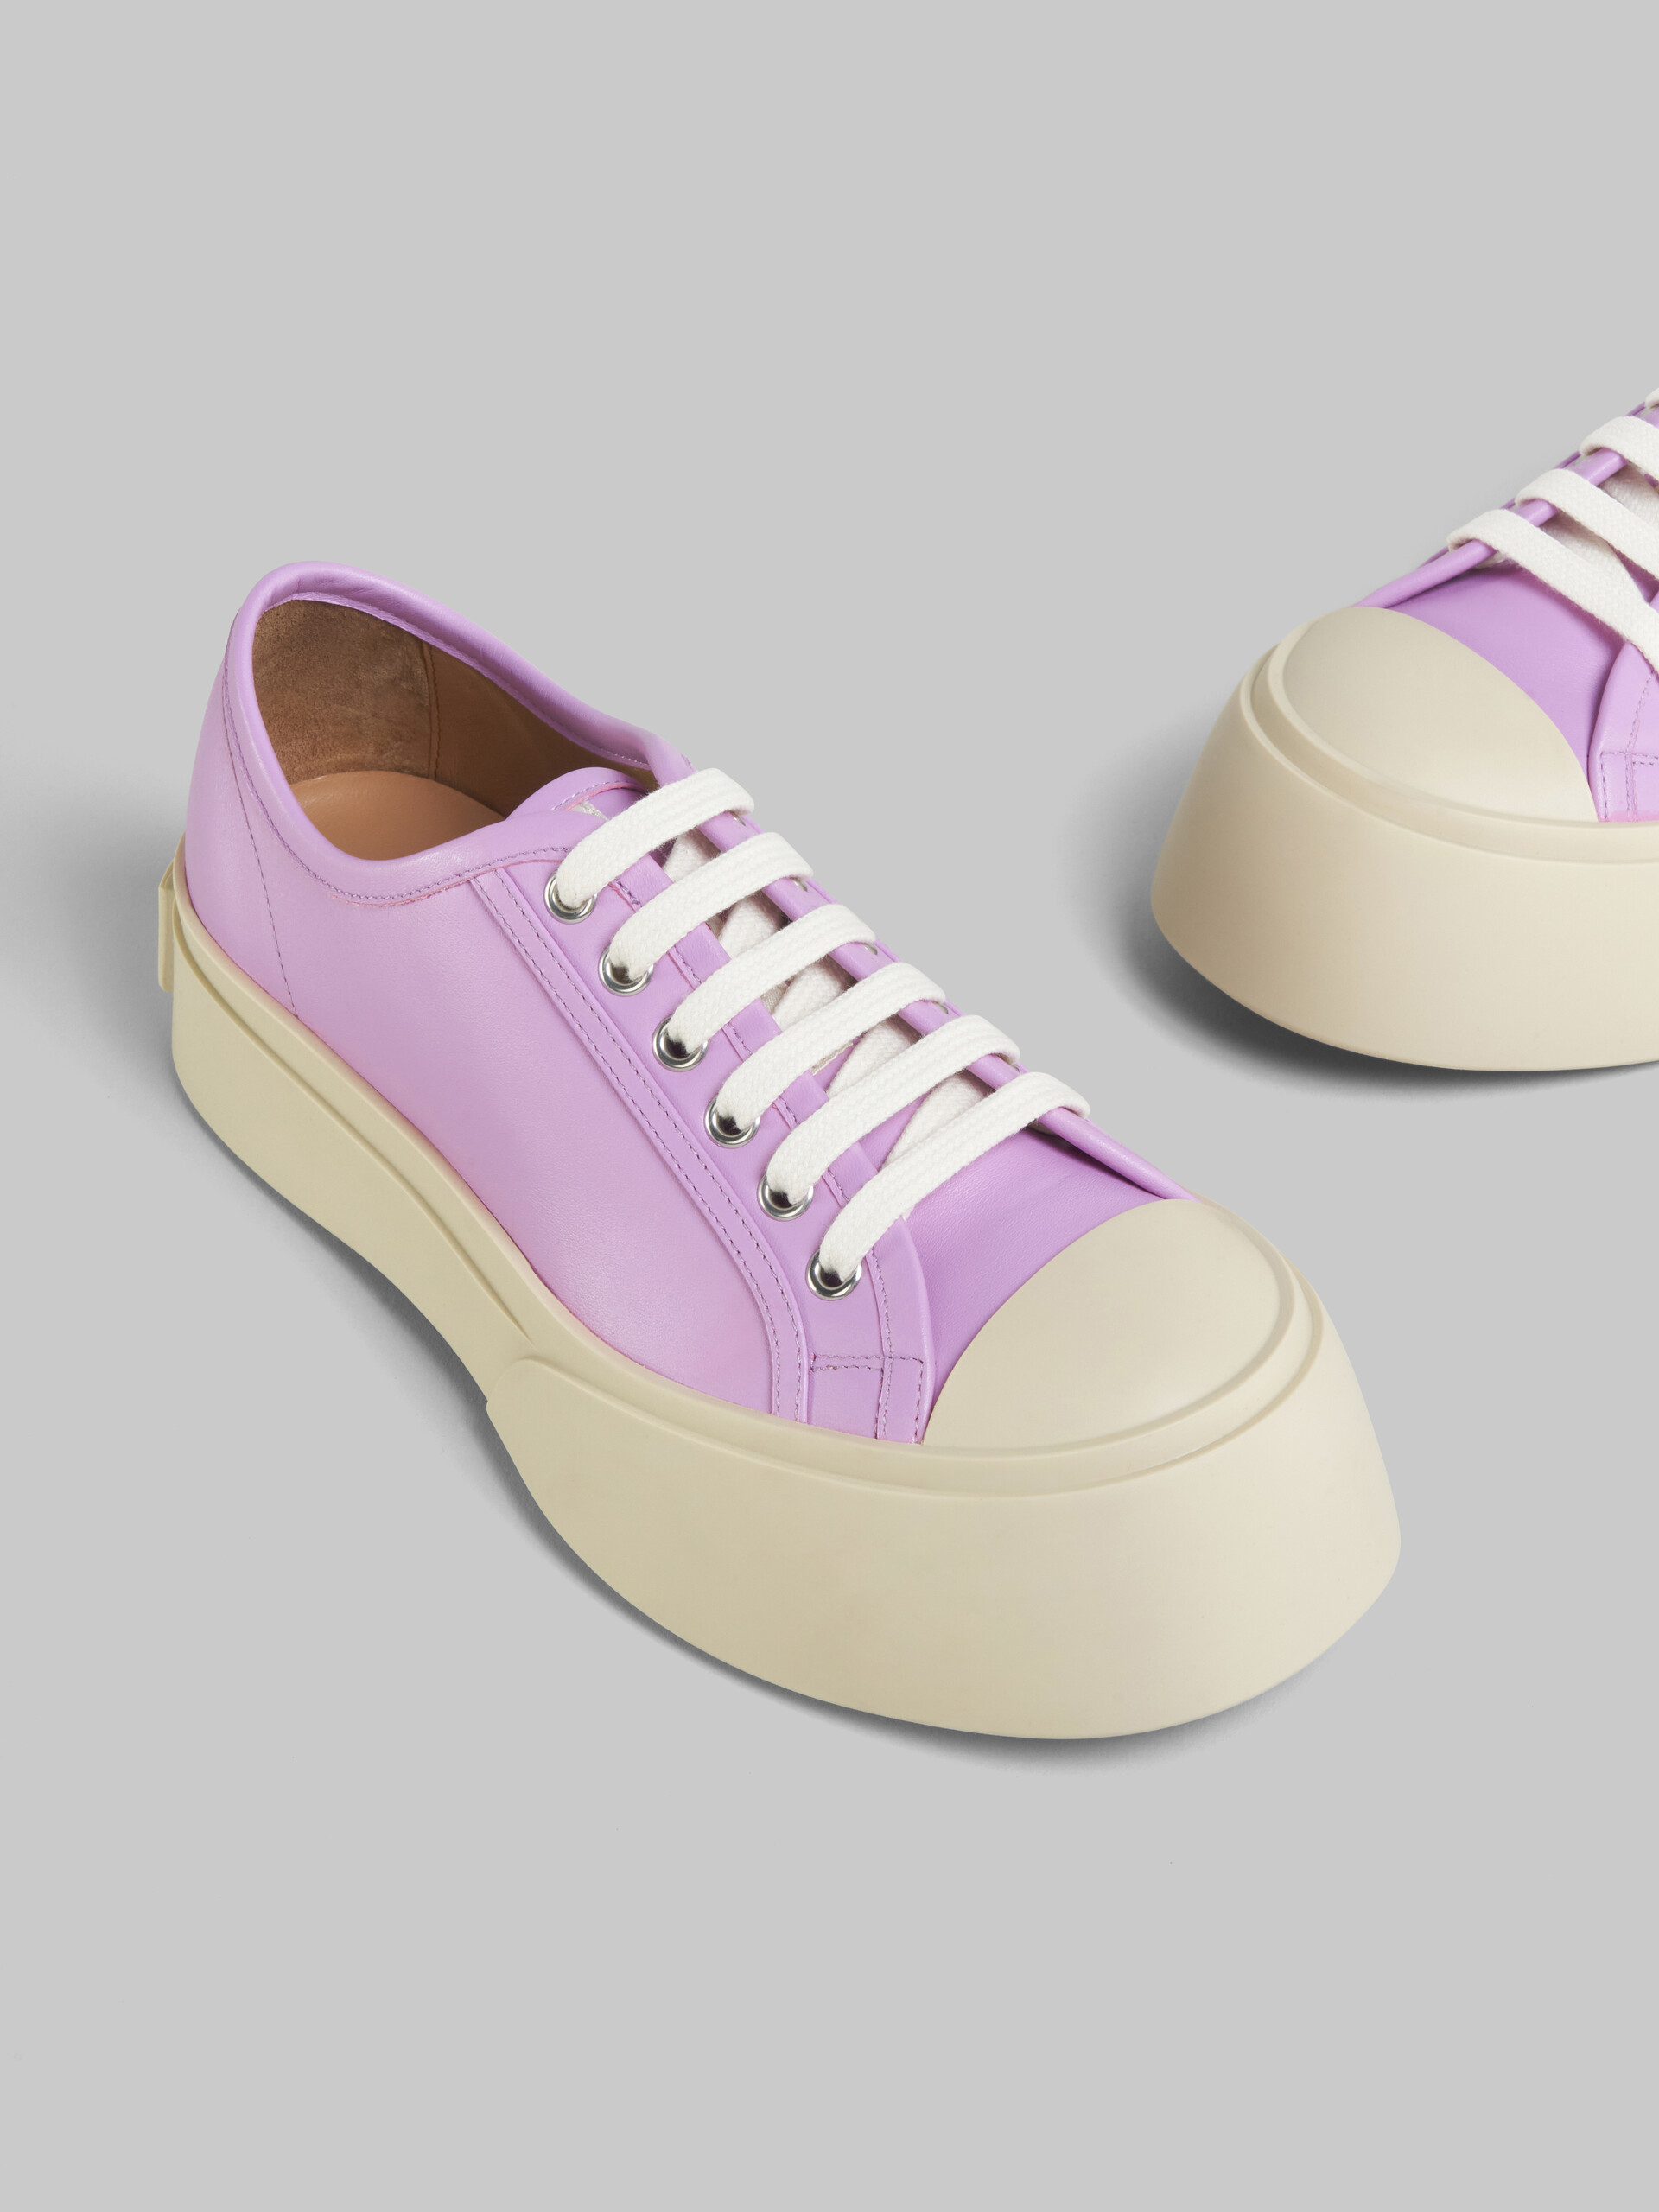 Lilac nappa leather Pablo lace-up sneaker - Sneakers - Image 5